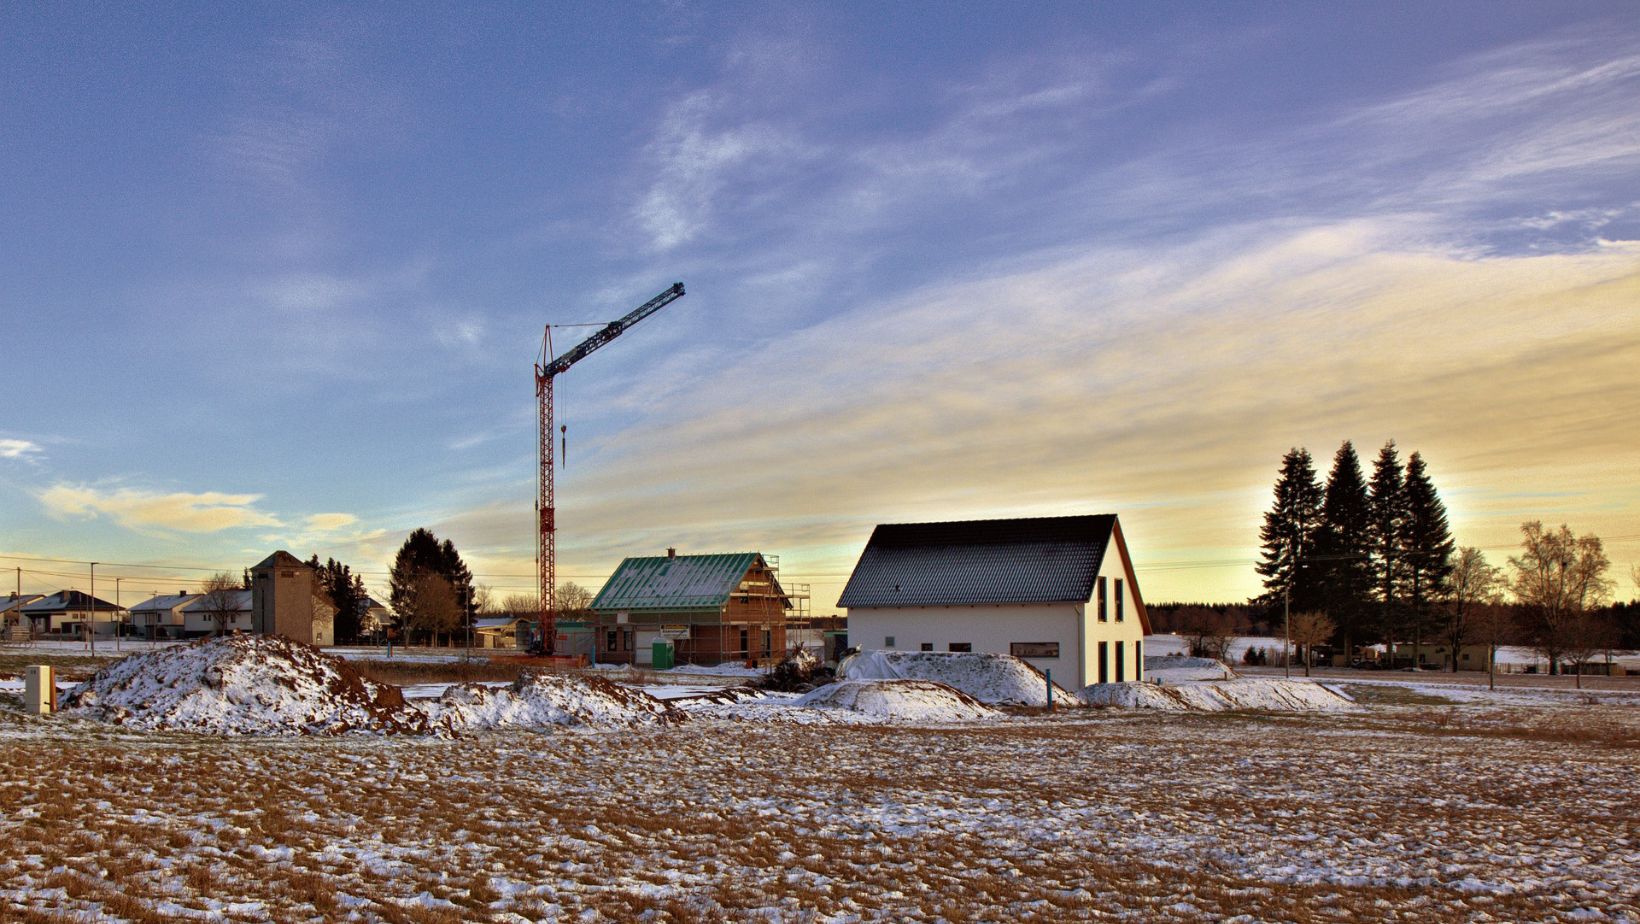 A crane at a construction site in winter.